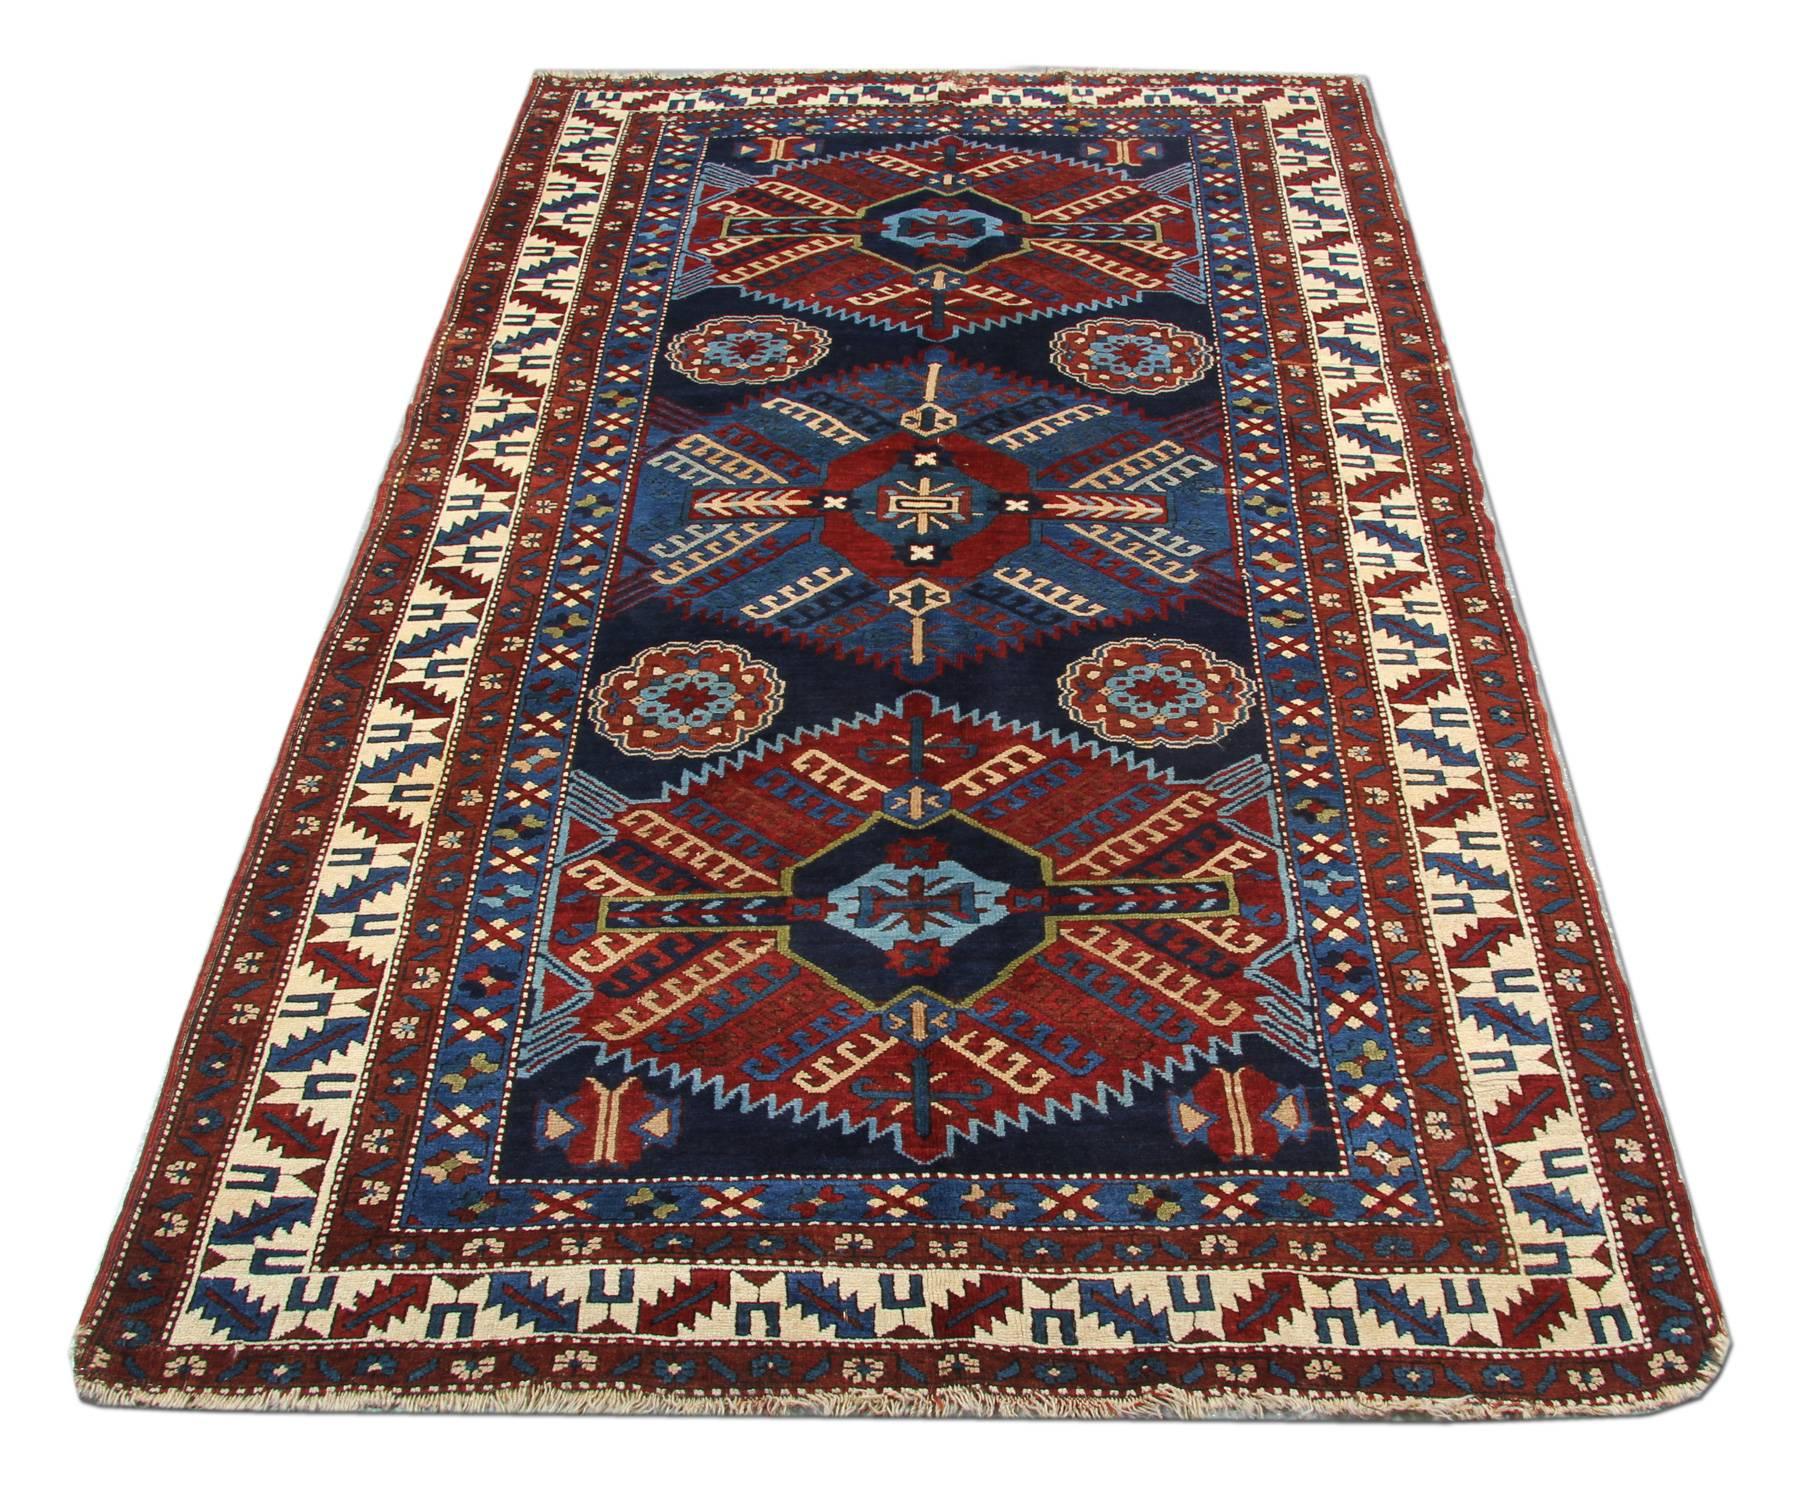 An excellent handwoven Kazak rug example of Caucasian handmade carpet rug weaving from the Kazak region. Though this dark blue rug has a Shiny background and 3 stylish Central Medallion patterned rugs may seem like from a distance, but this woven